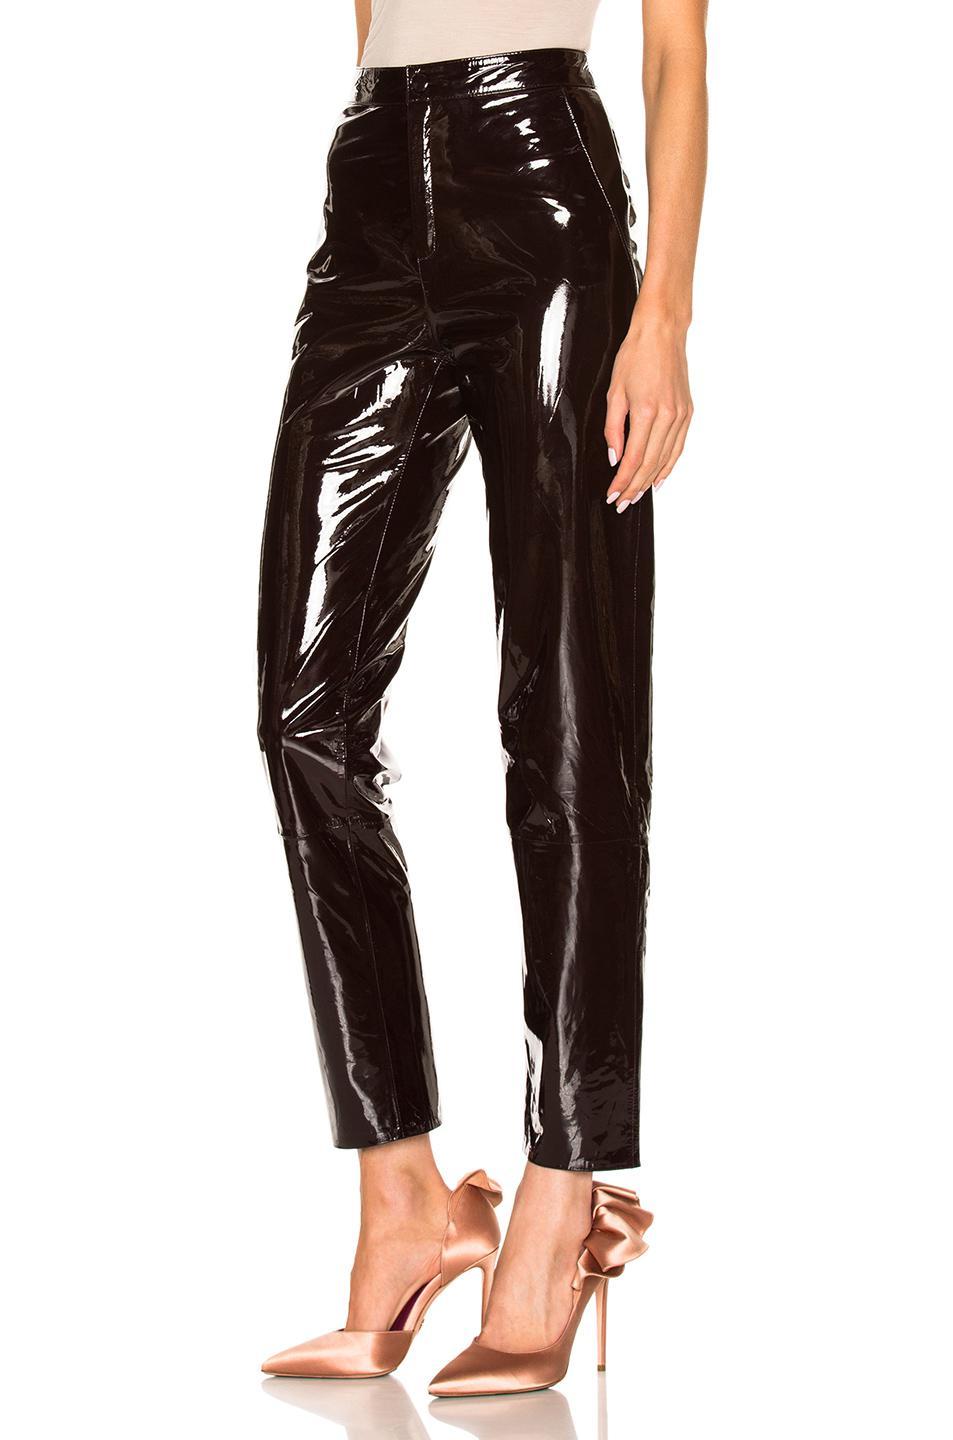 Zeynep Arcay high waisted patent leather pants in plum
100% lambskin leather
Made in Turkey
Zip fly
Faux side slit pockets
Faux back welt pocket

Size:
No size label - estimated to be a XS/Size 25, please refer to the measurements below

In